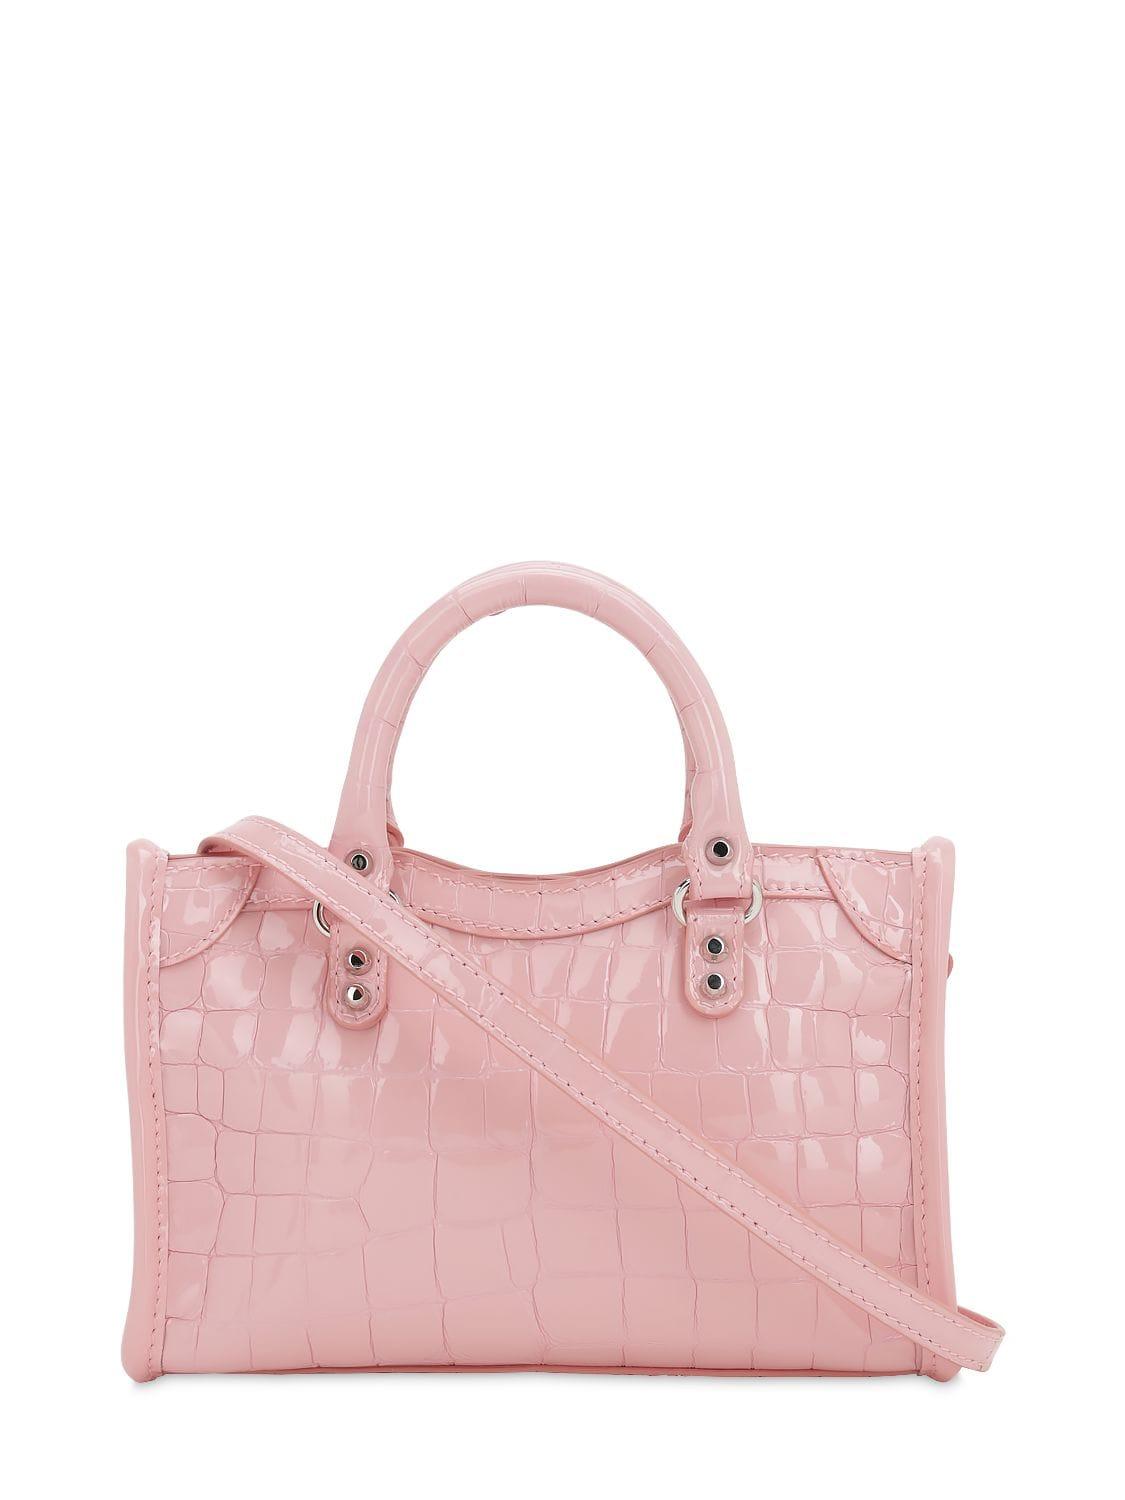 Balenciaga Nano City Croc Embossed Leather Bag in Pink